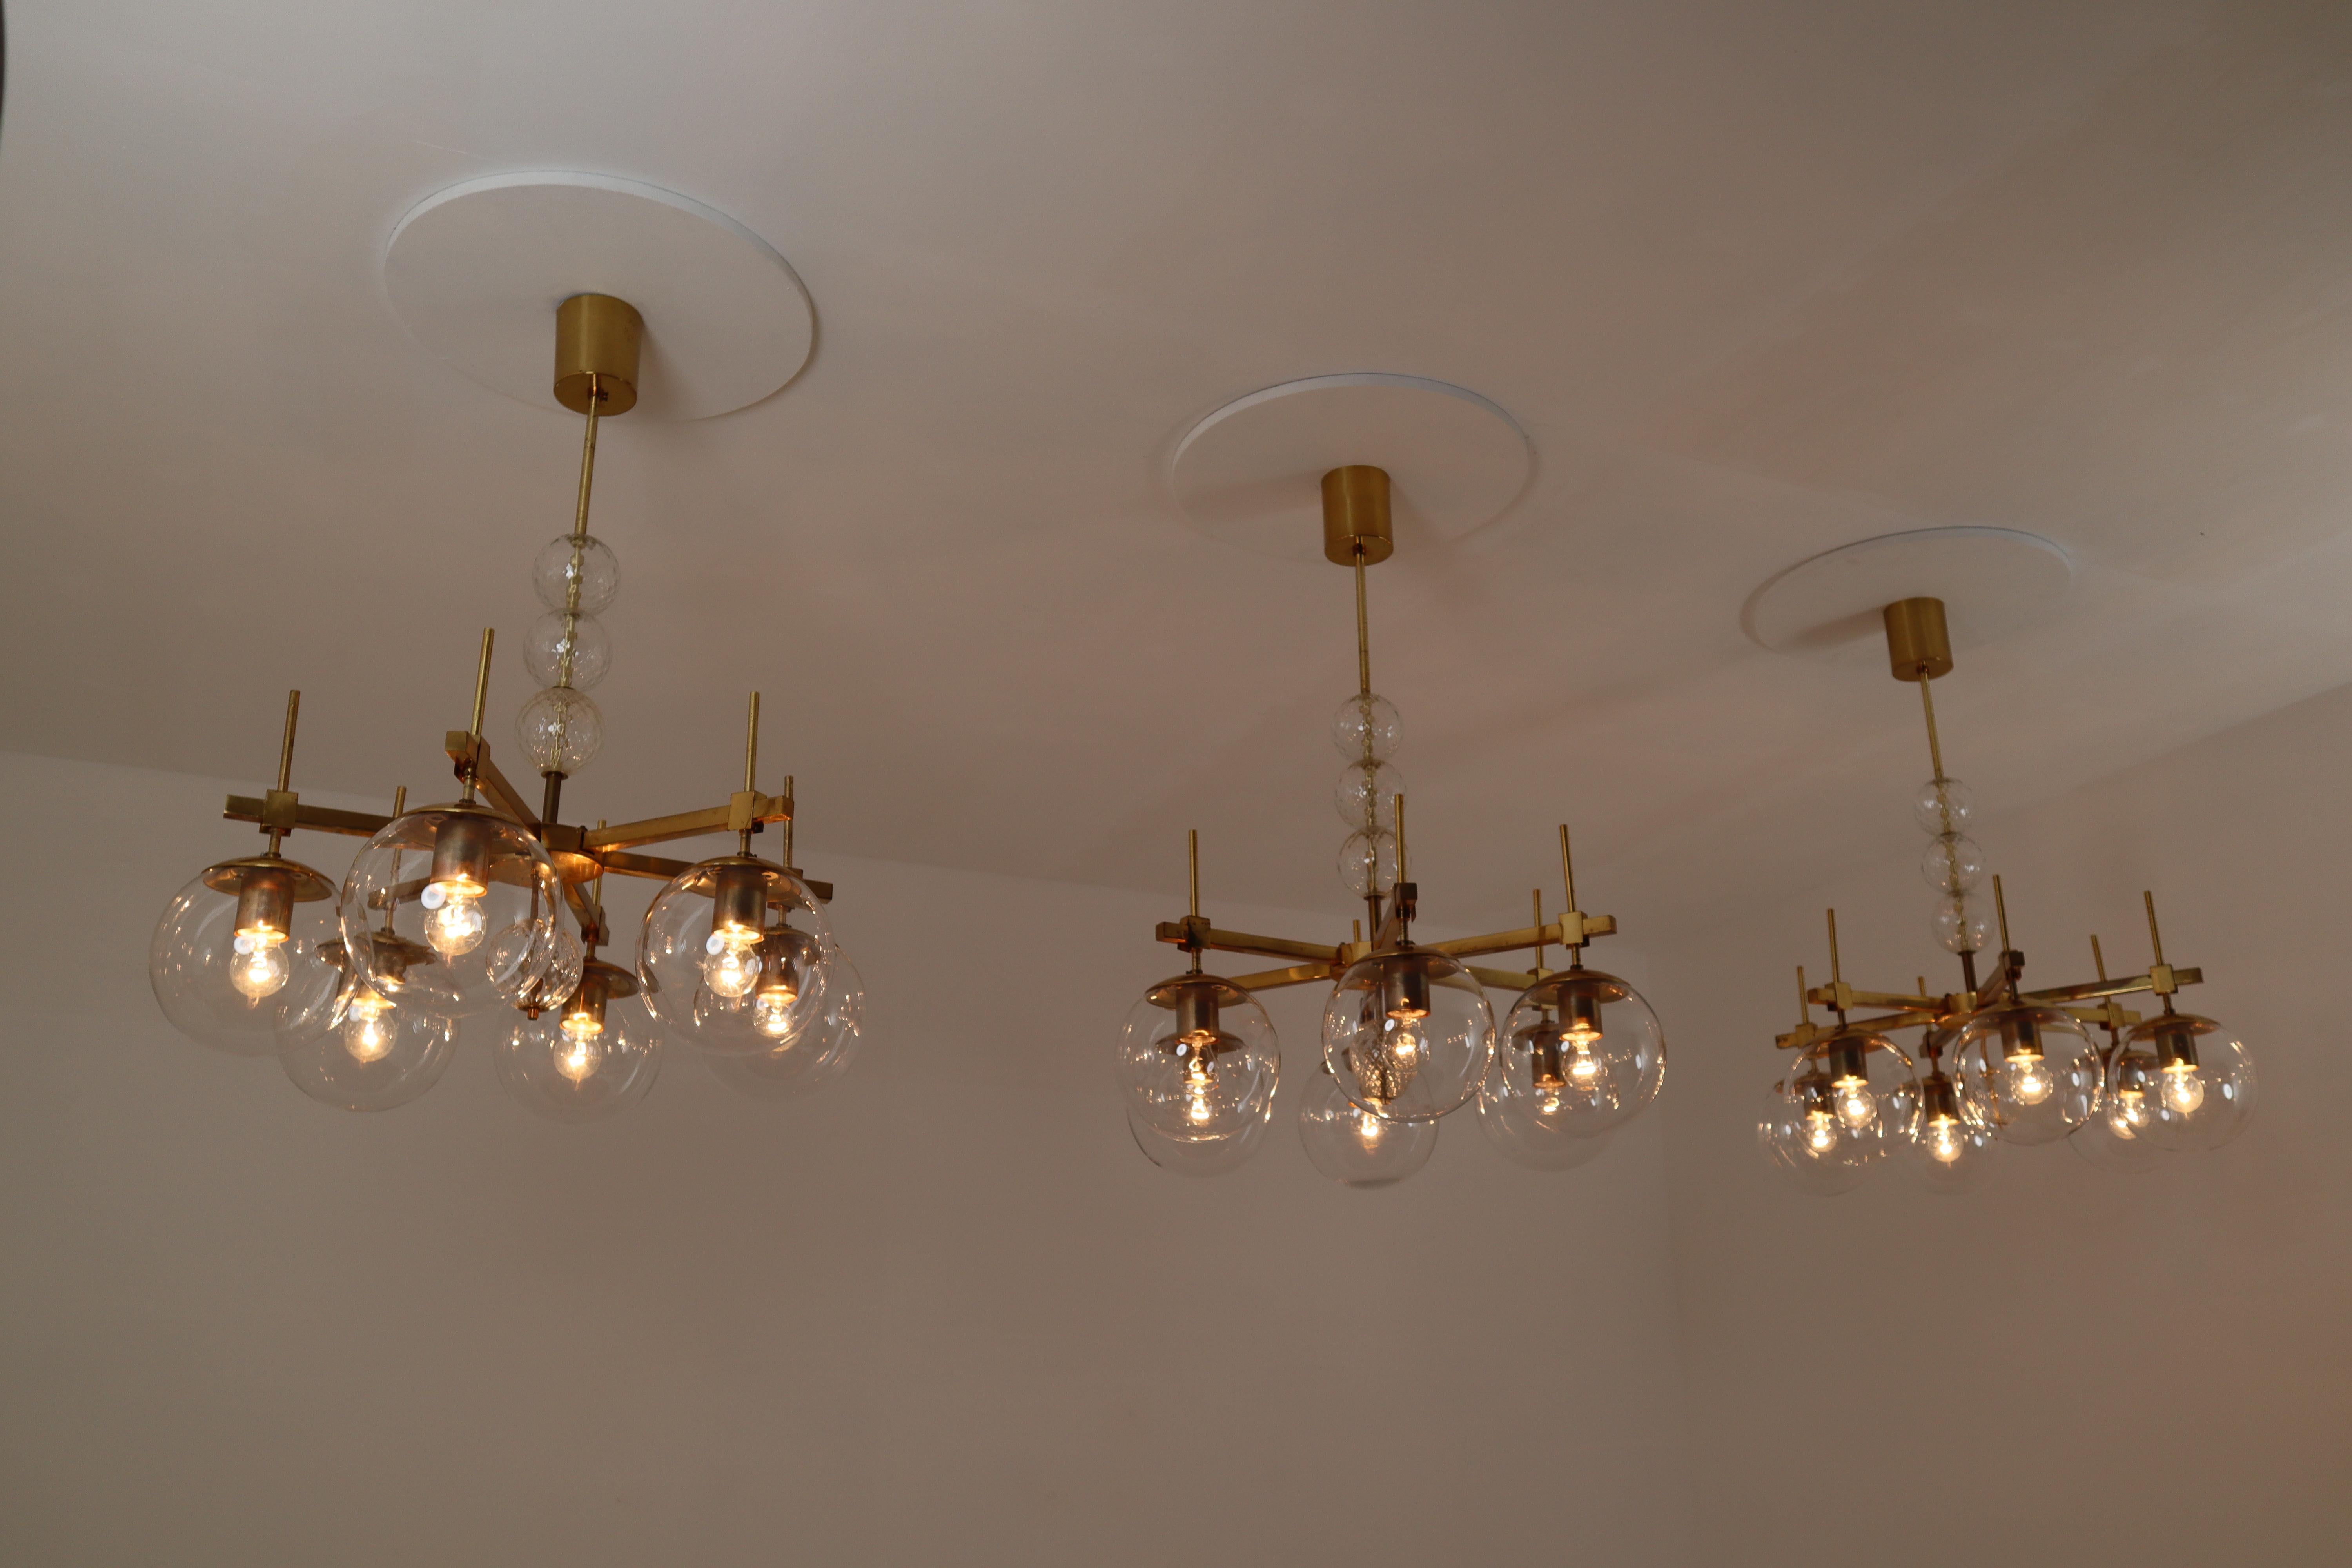 Six Midcentury Chandeliers with Brass Fixture and Hand-Blown Glass, Europe 10